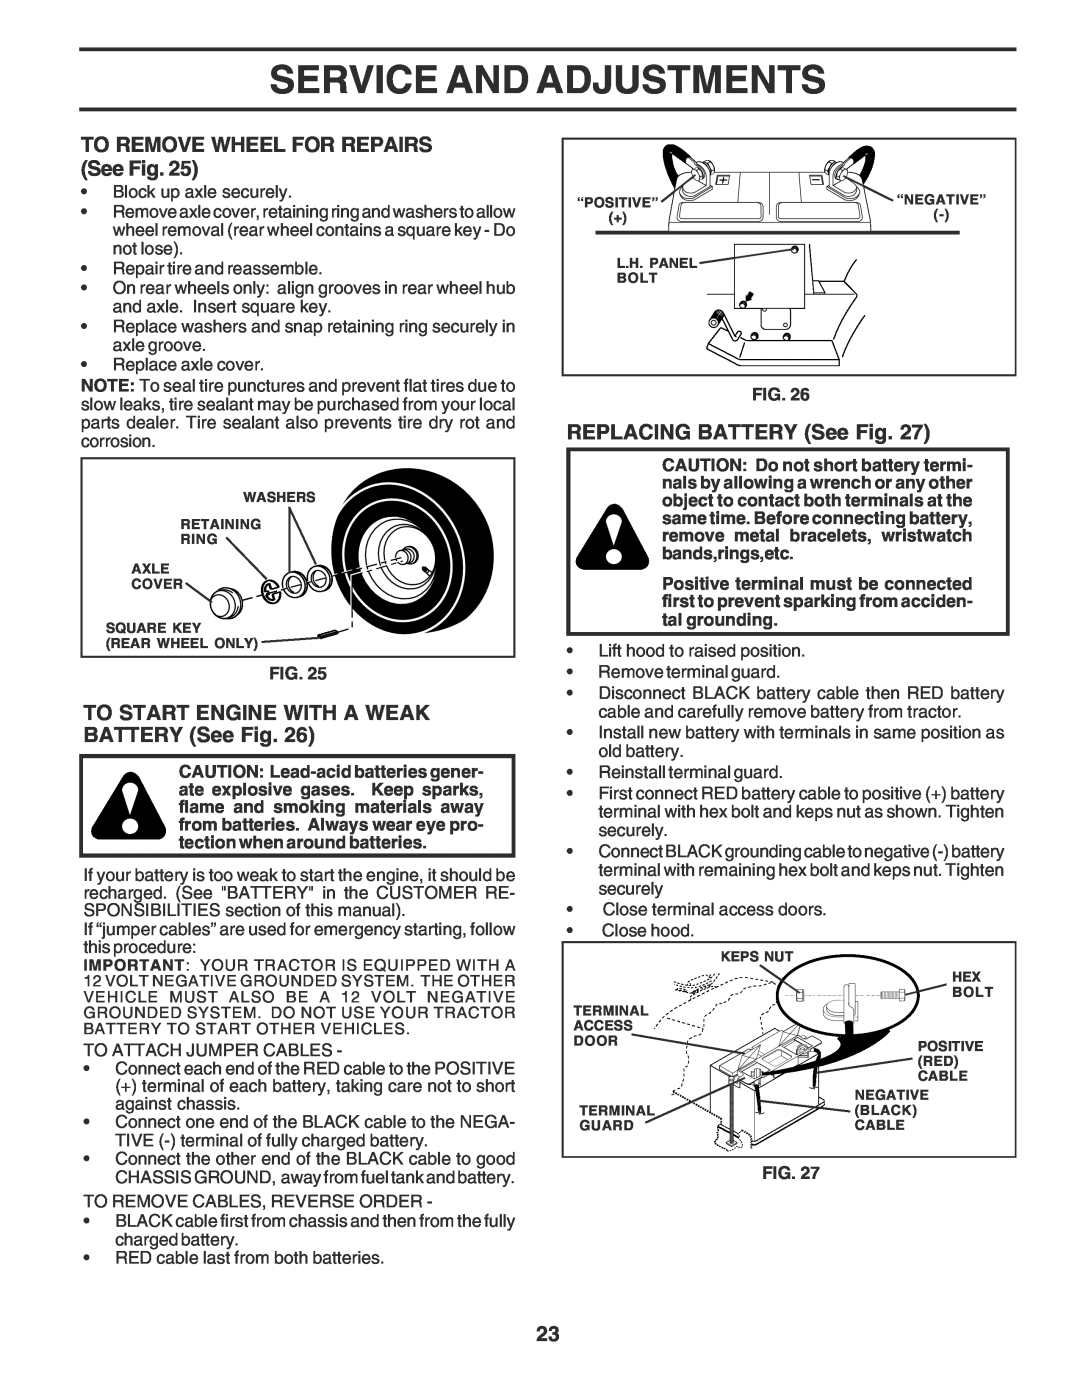 Poulan PR20PH42STB owner manual TO REMOVE WHEEL FOR REPAIRS See Fig, TO START ENGINE WITH A WEAK BATTERY See Fig 